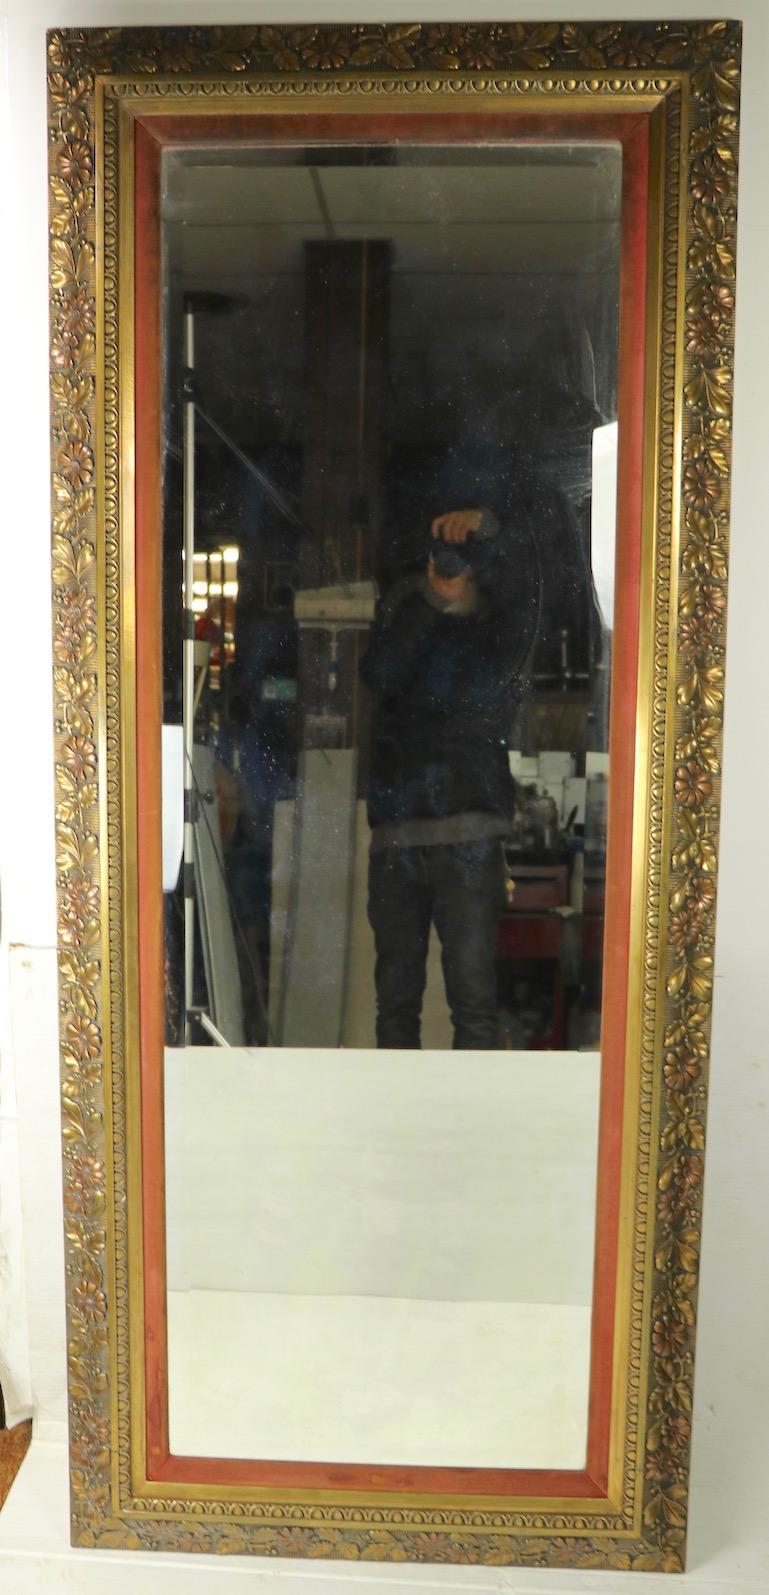 Nice large Victorian pier mirror having a substantial carved wood frame with velvet interior boarder (shows wear) and beveled plate glass mirror. The frame features dimensional foliate design, reminiscent of the later Arts & Crafts Movement.